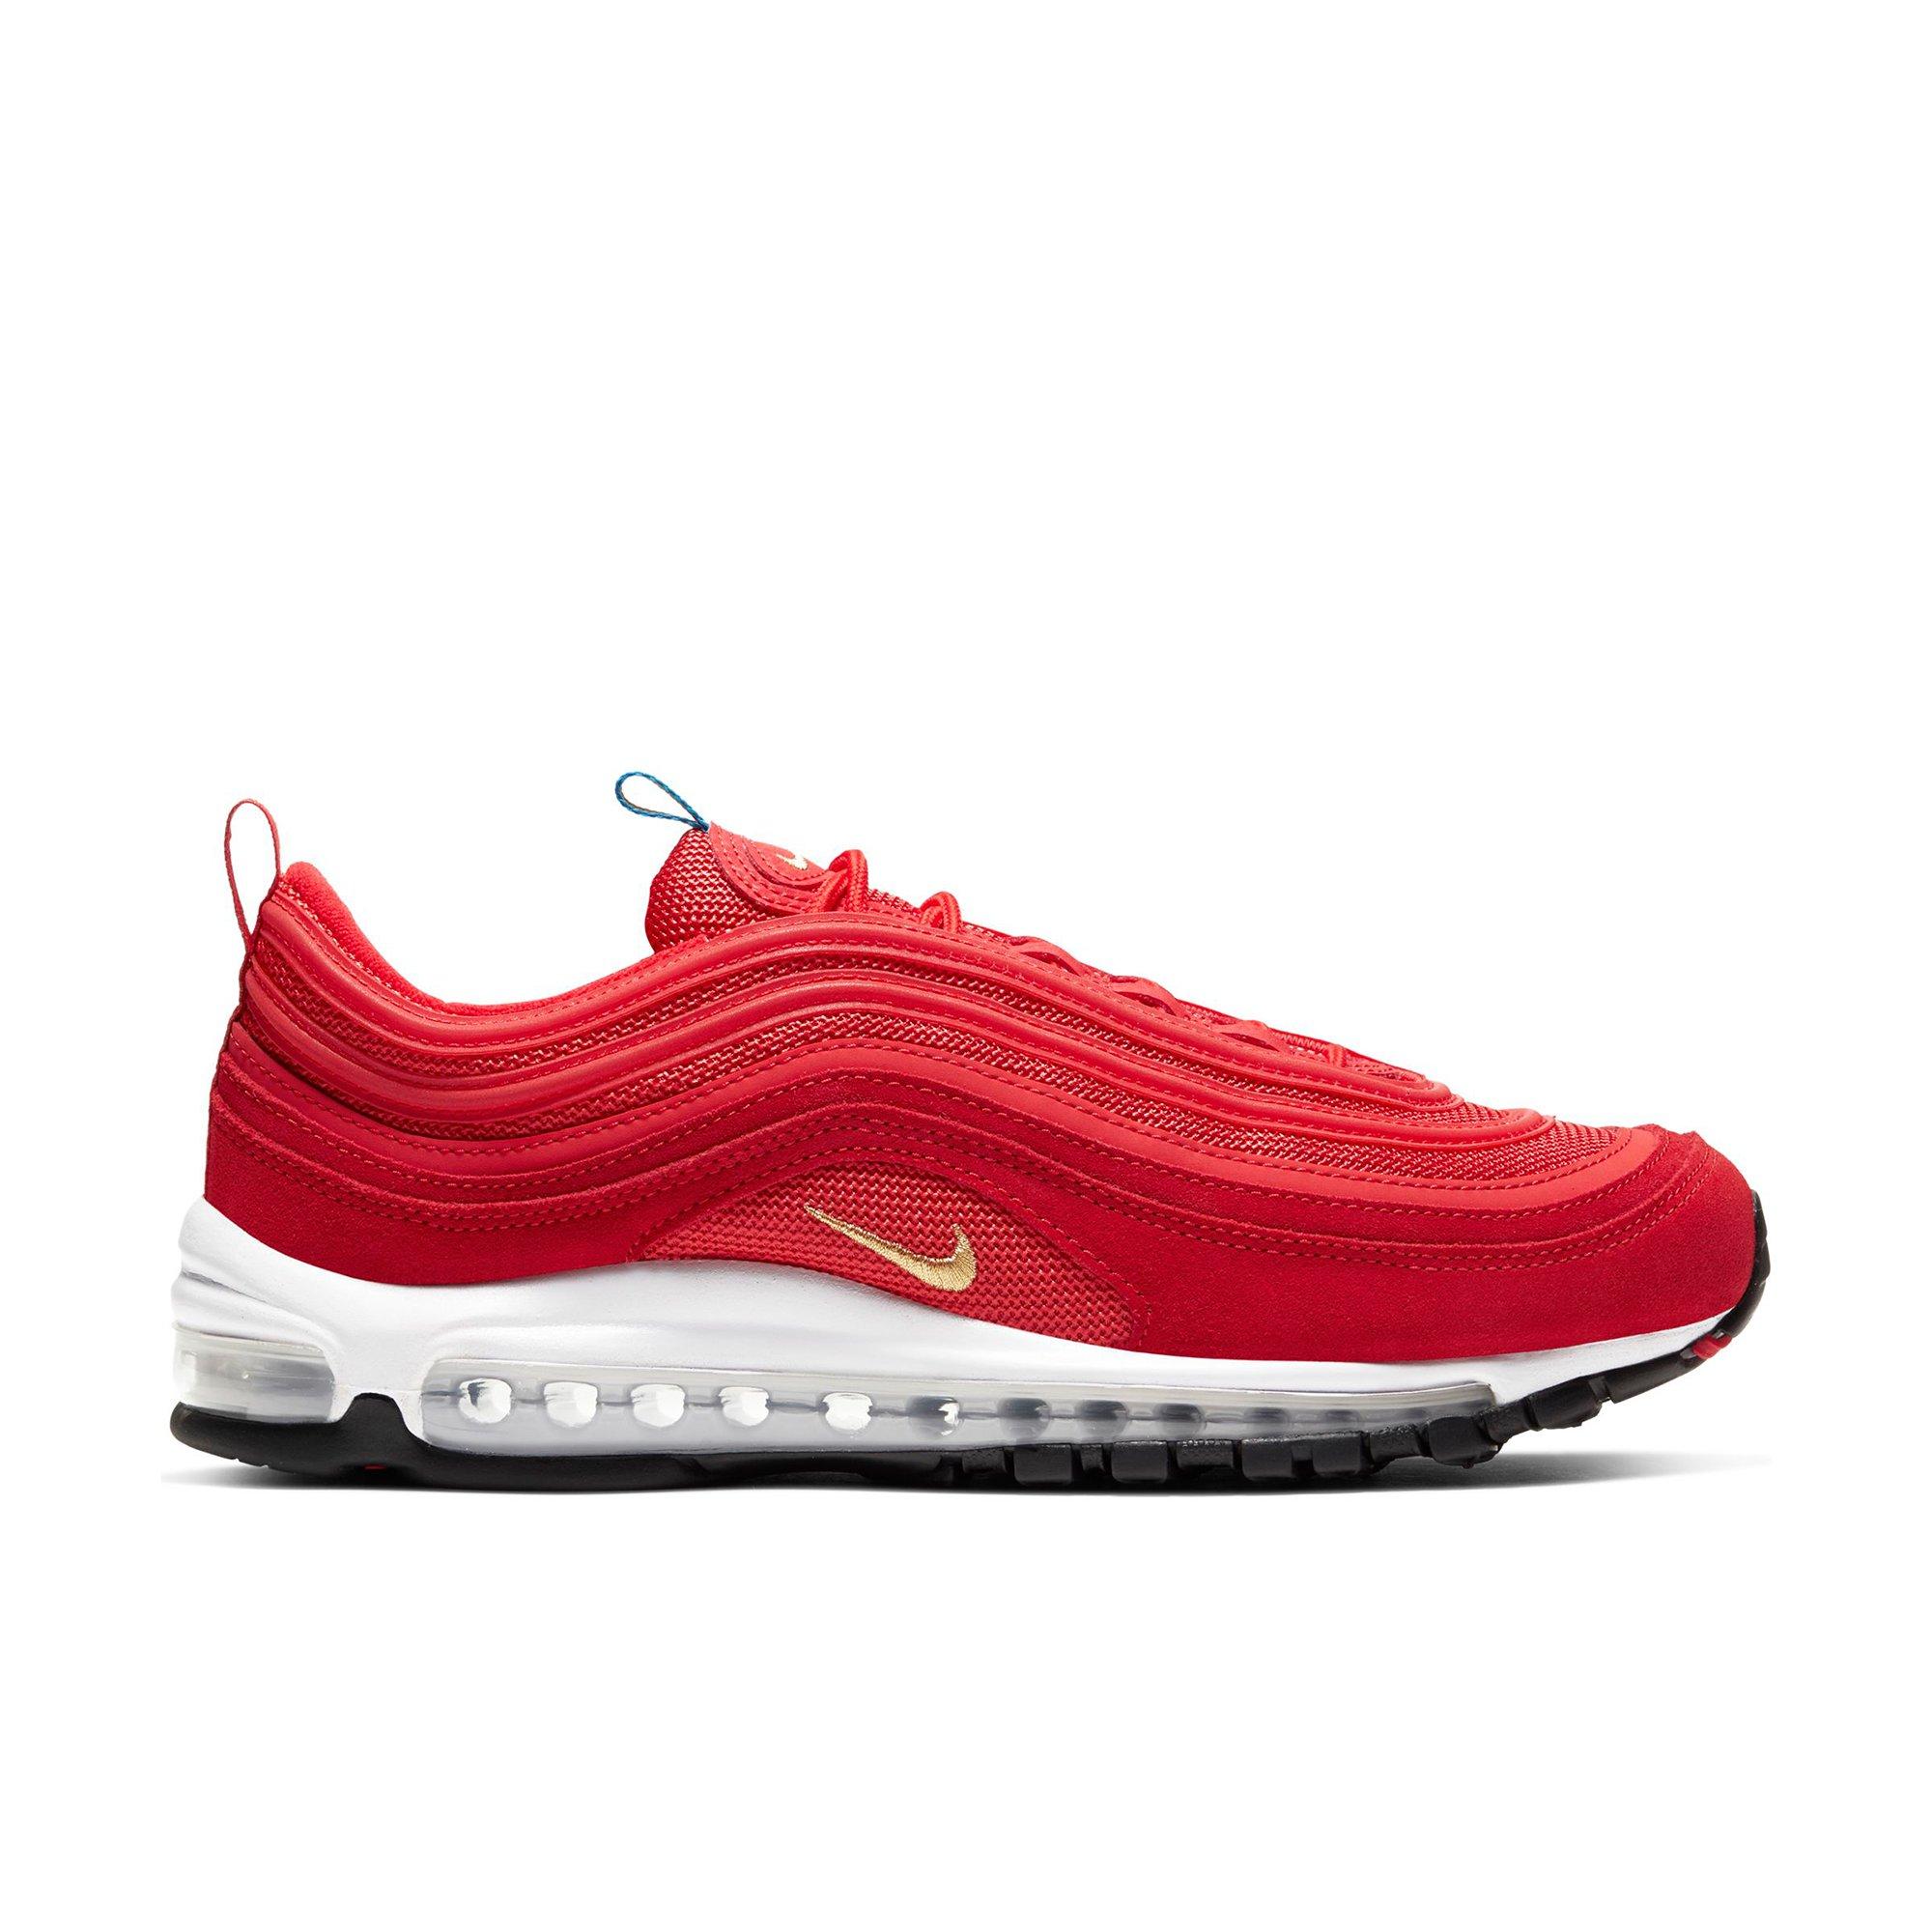 red nike 97s